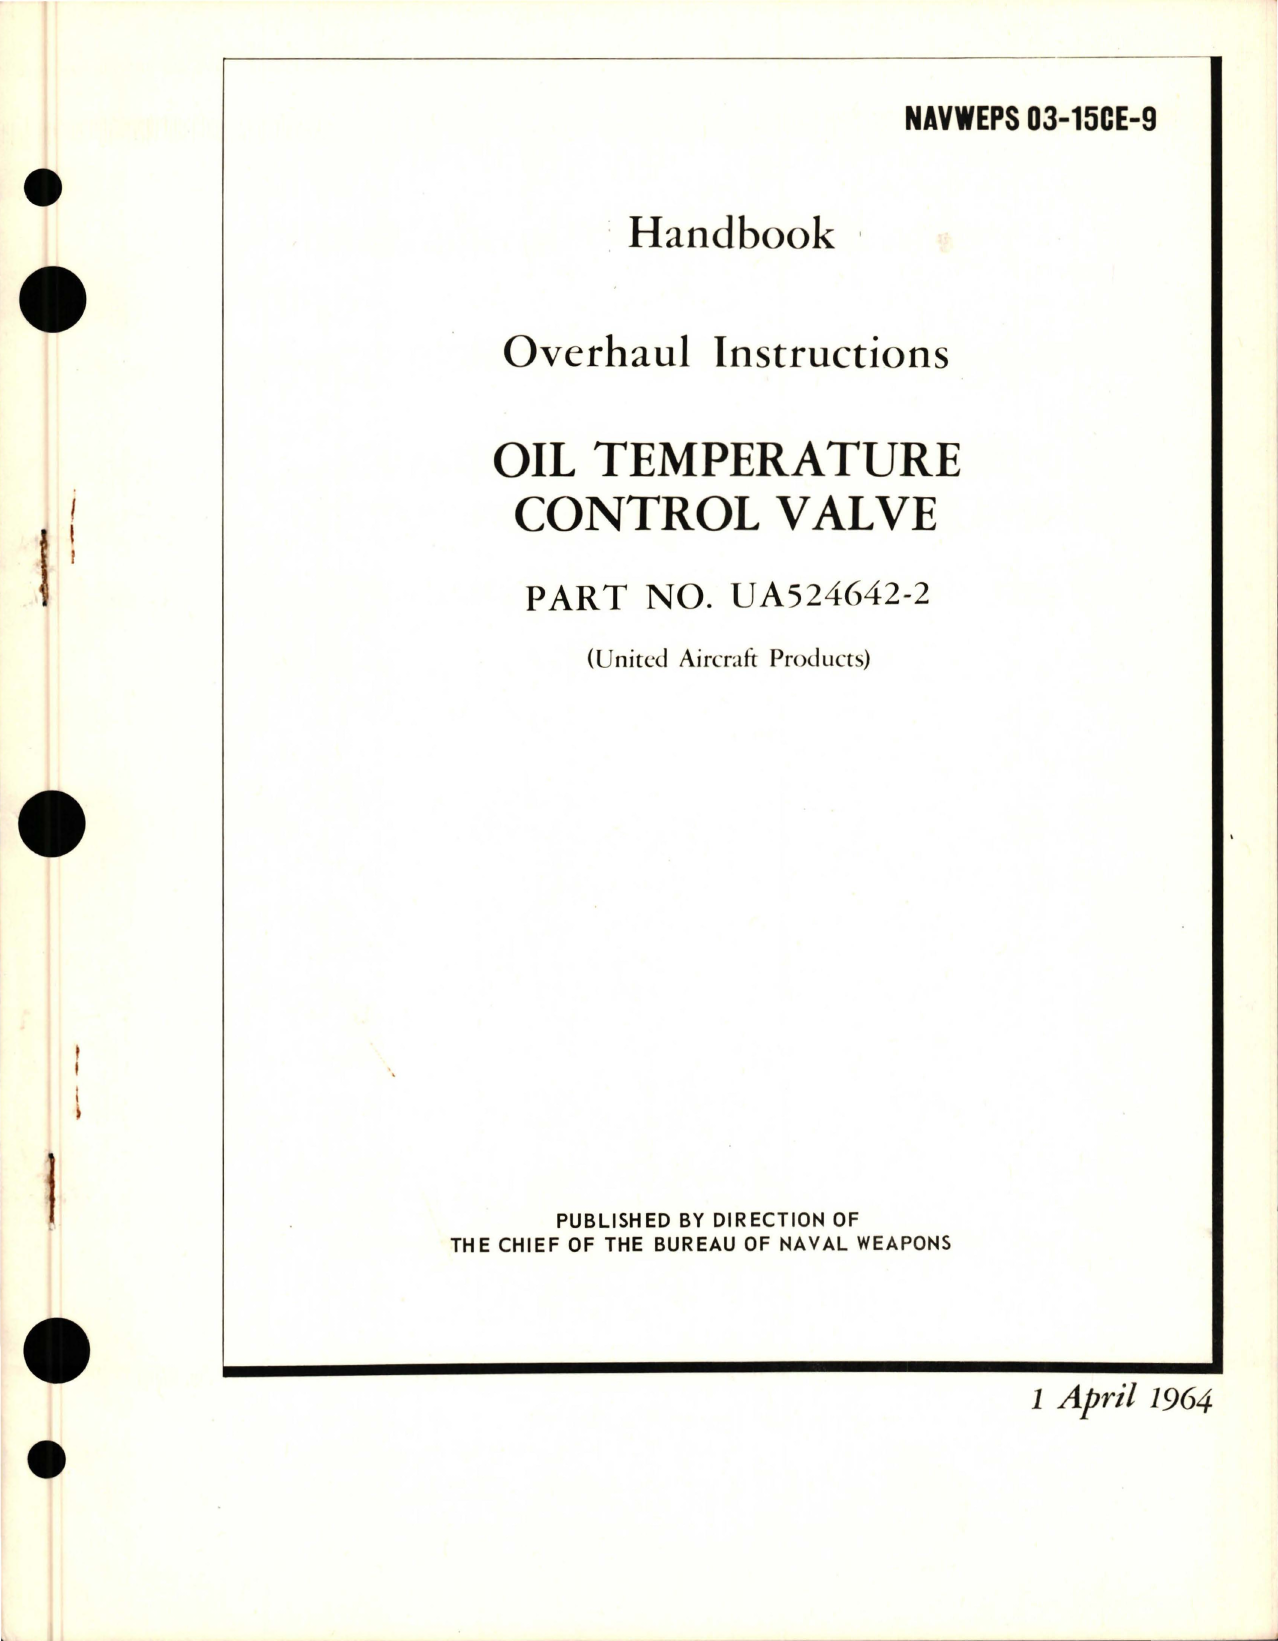 Sample page 1 from AirCorps Library document: Overhaul Instructions for Oil Temperature Control Valve - Part UA524642-2 